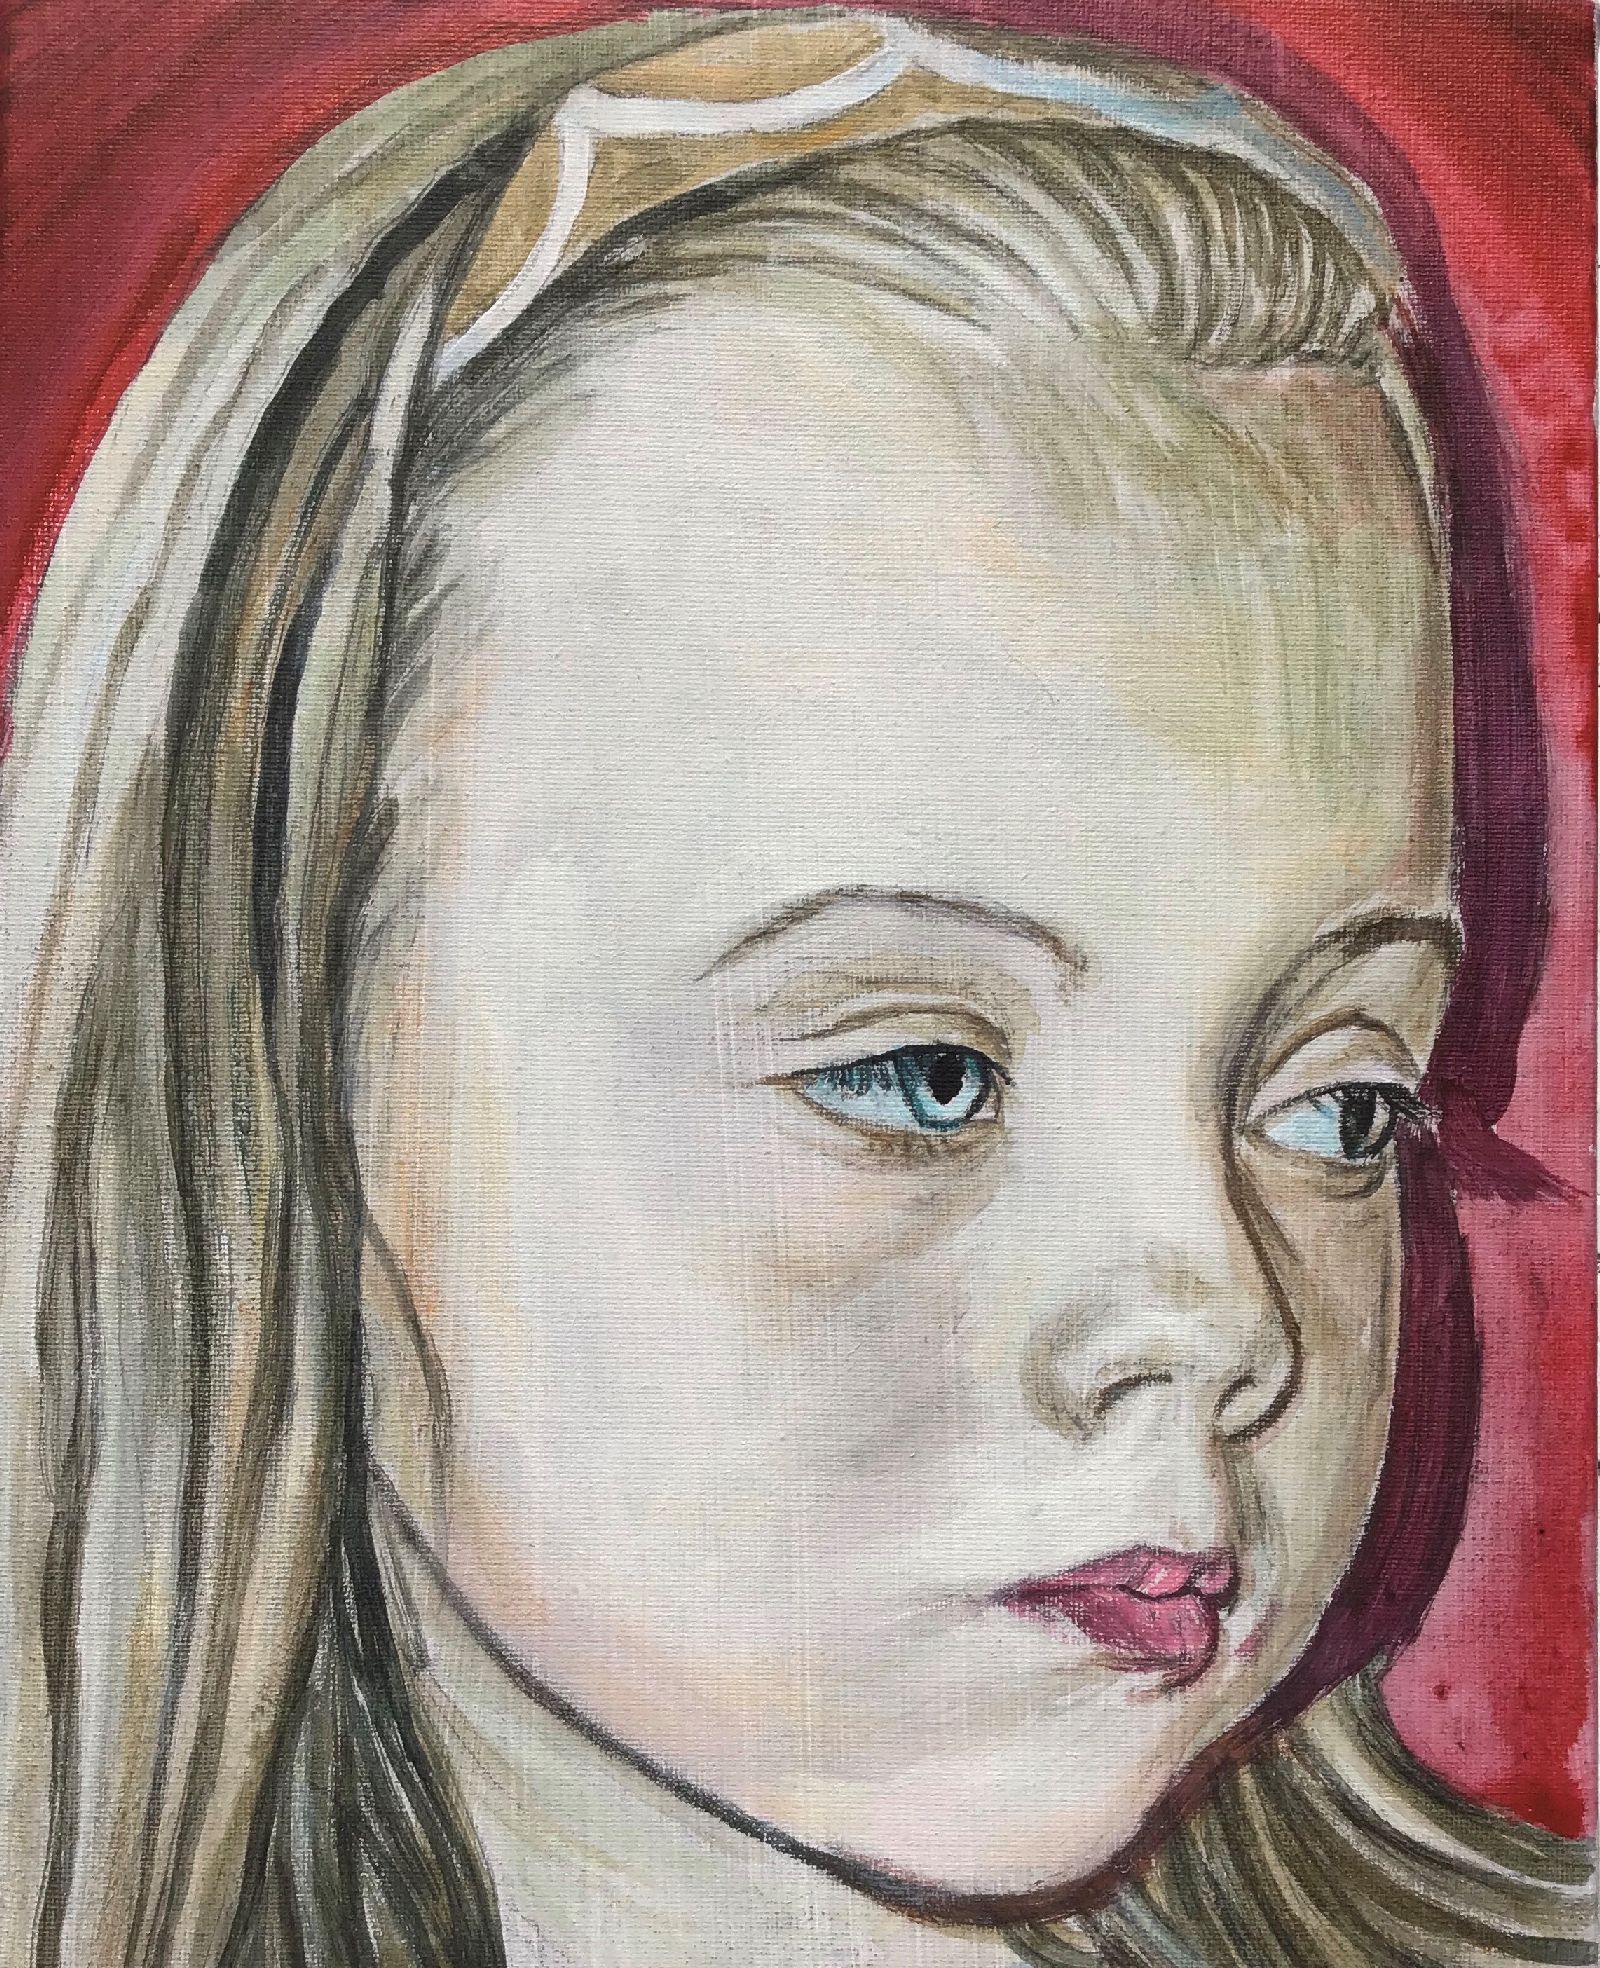 Young girl with Headband  by Christopher Banahan